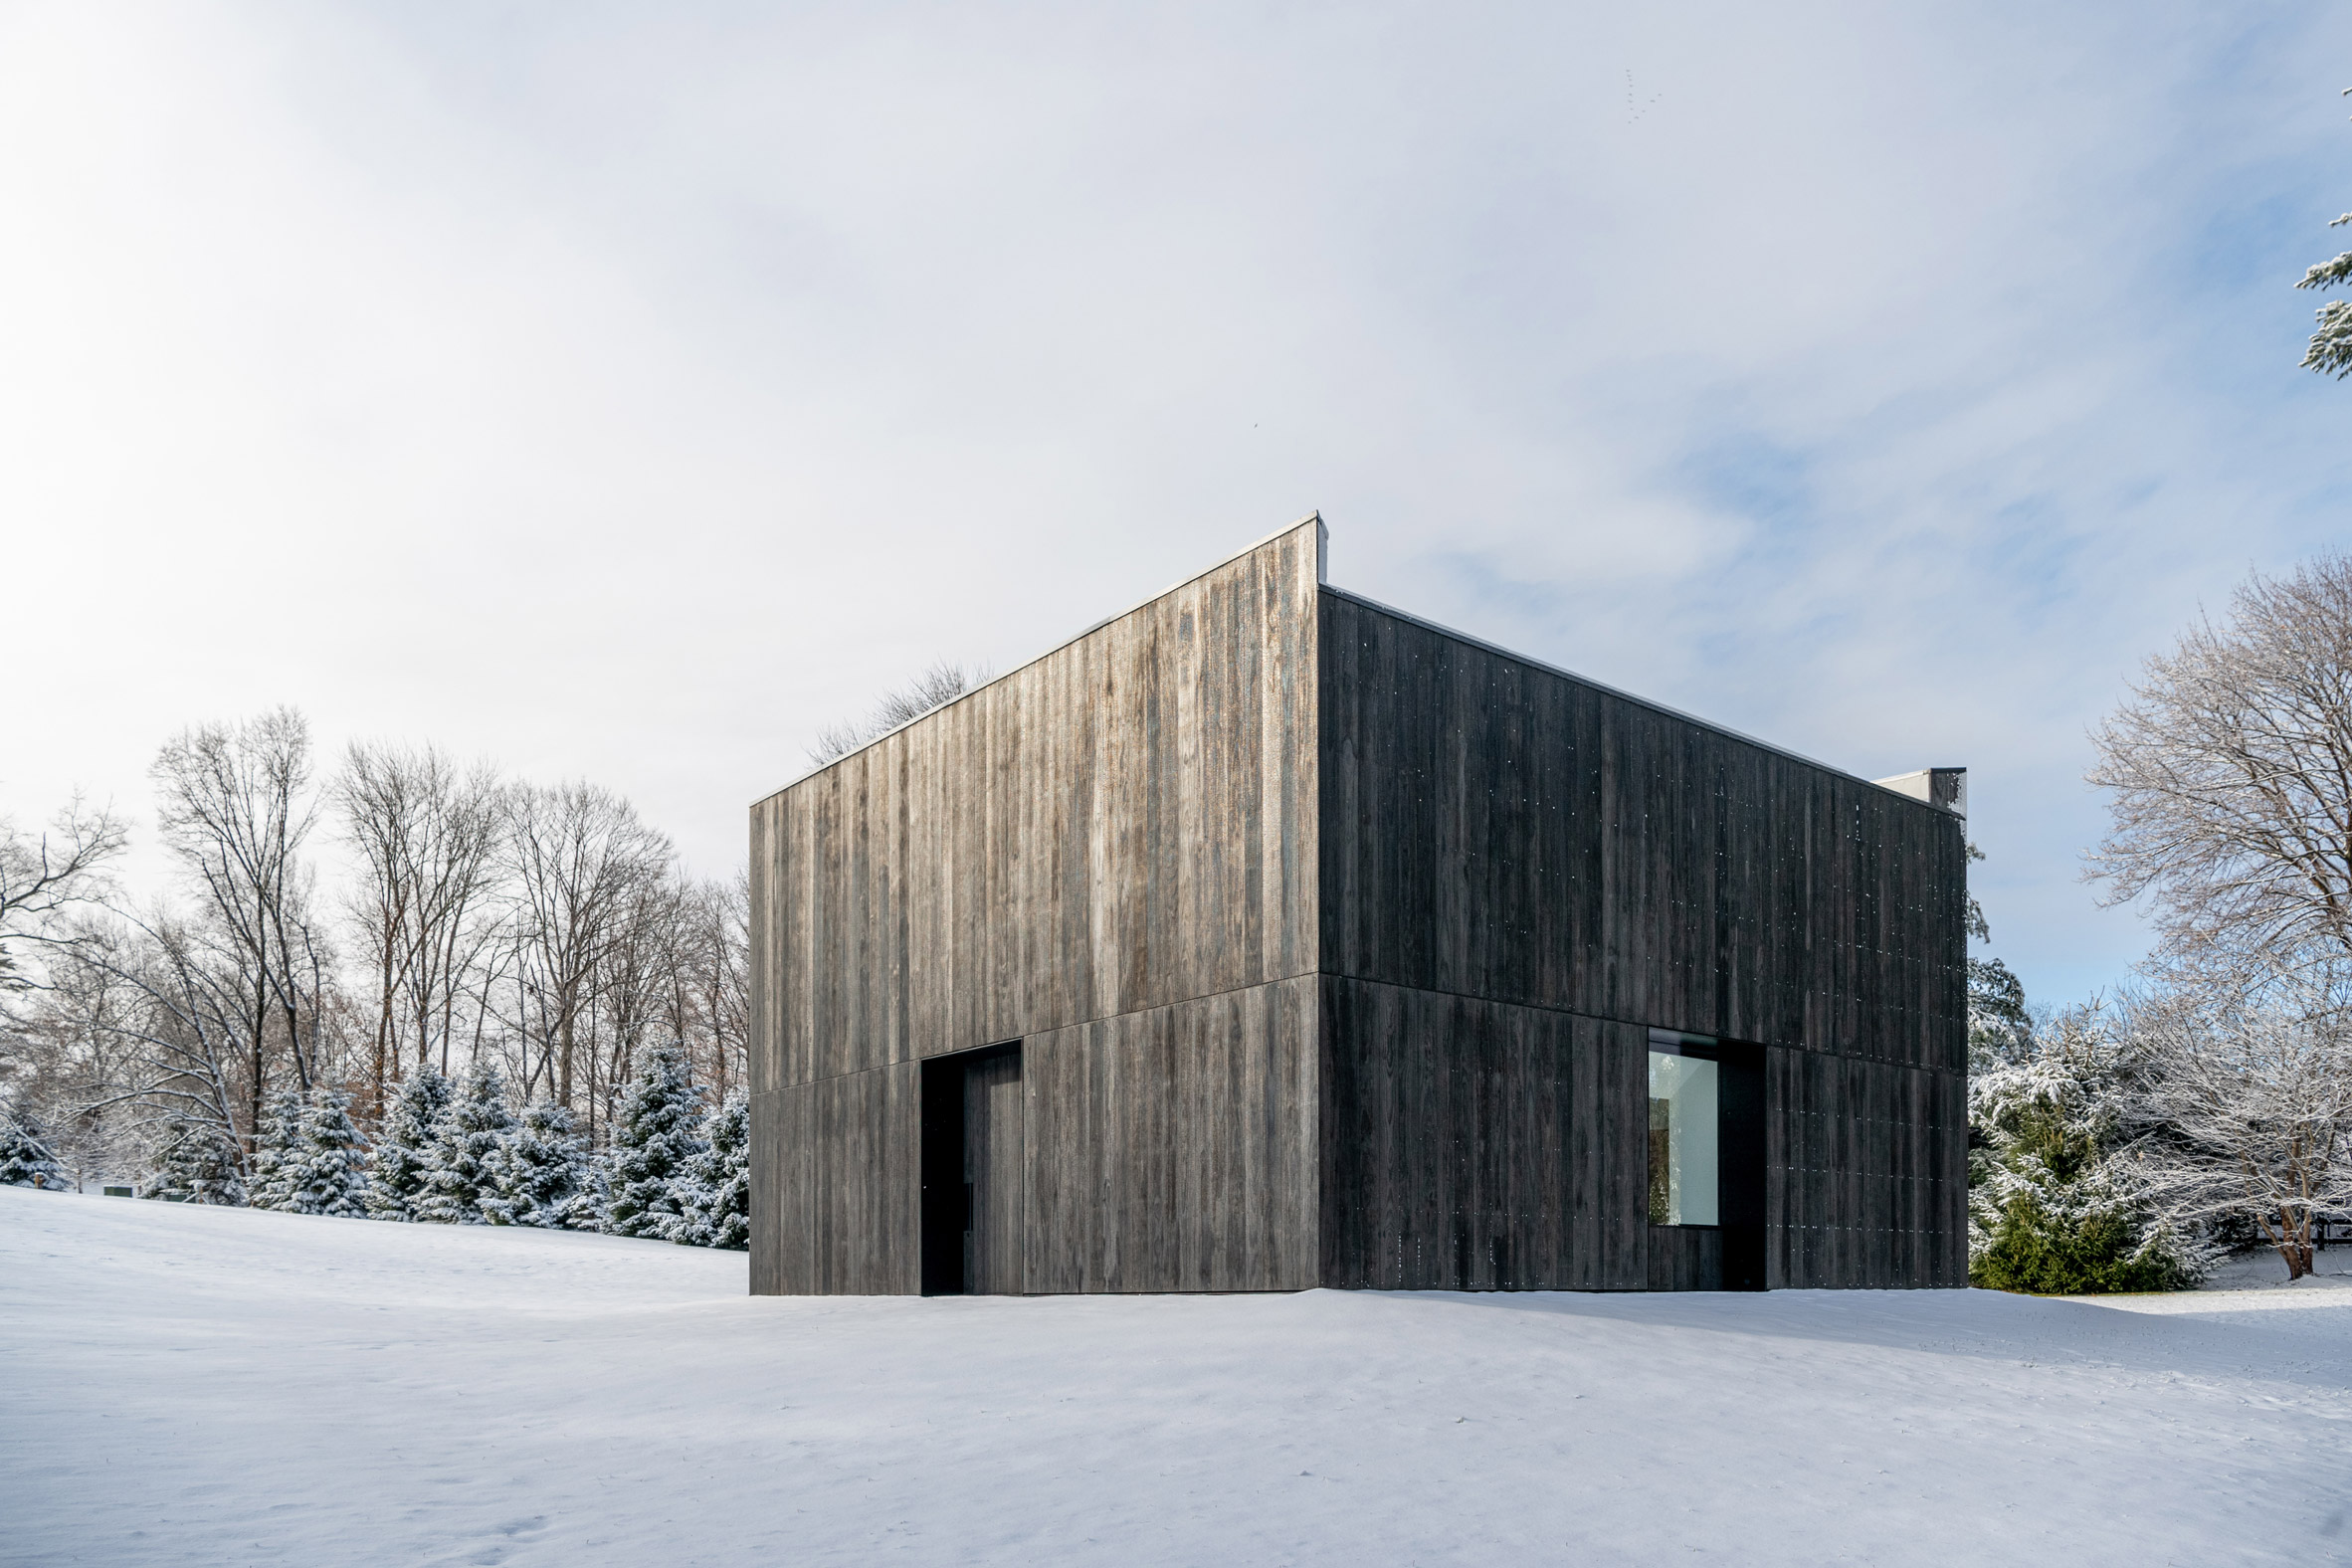 Snow surrounds charred-wood clad pavilion by OLI Architecture